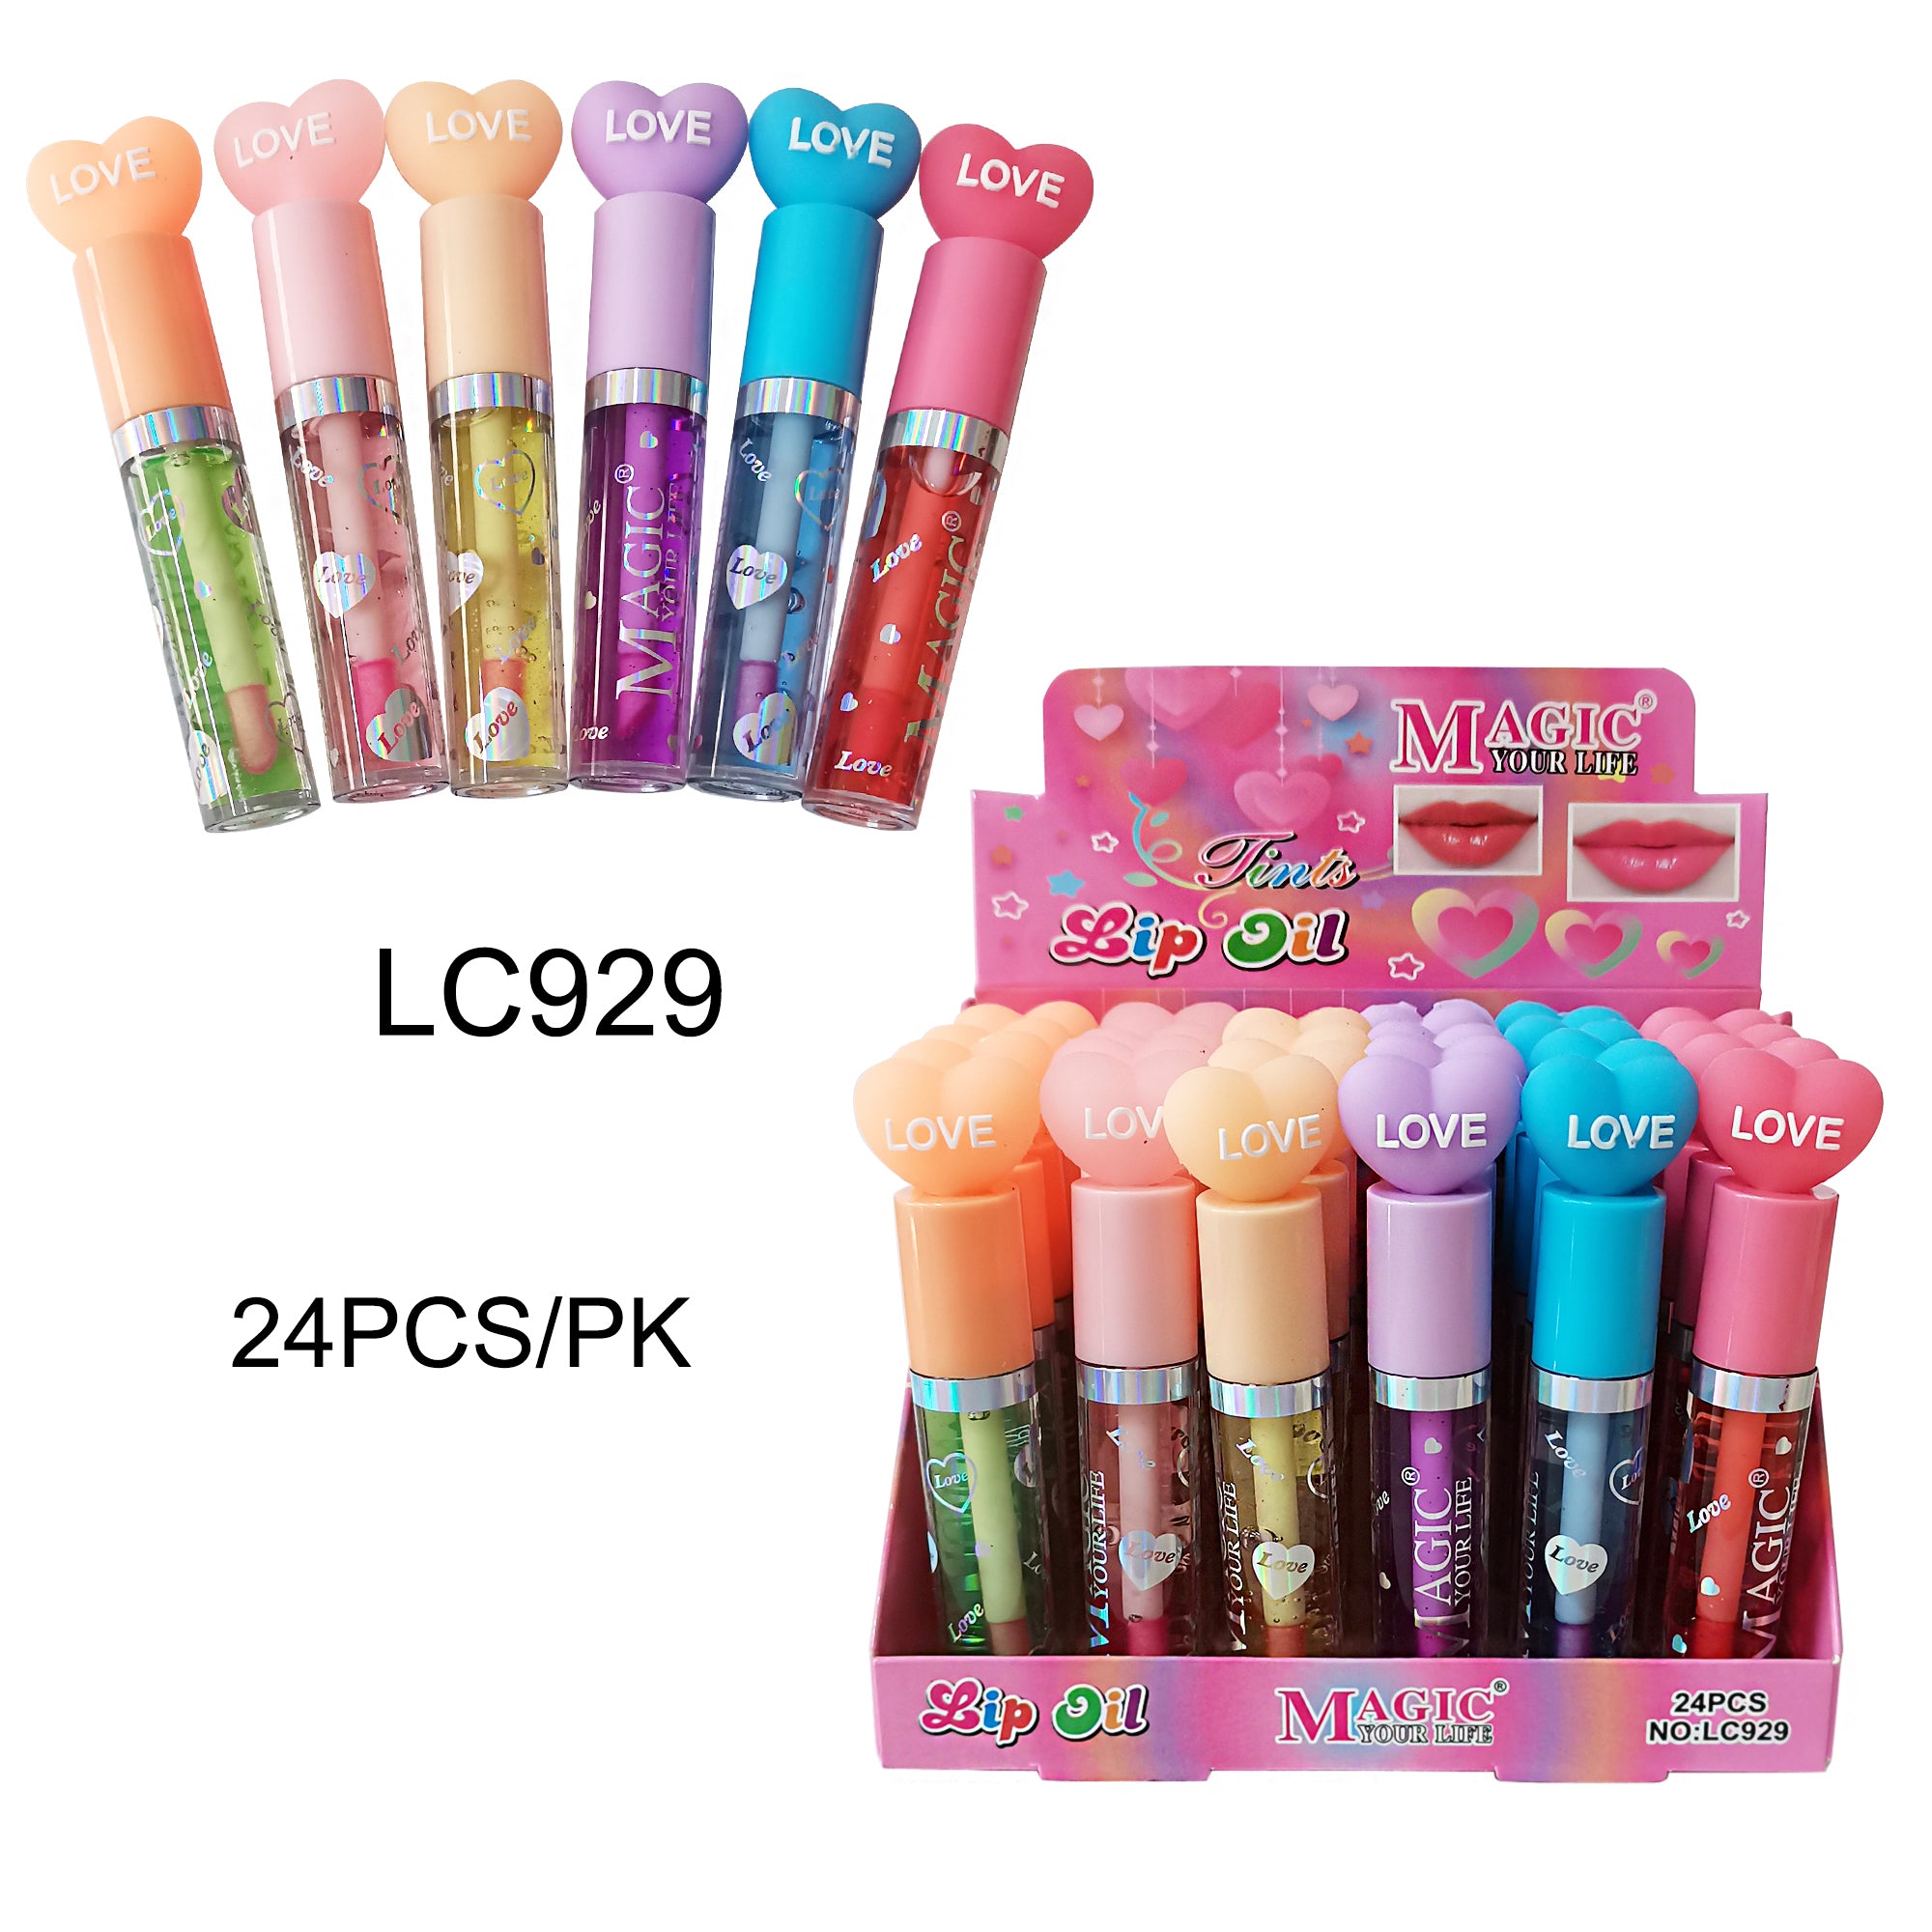 LC929 (24PC)